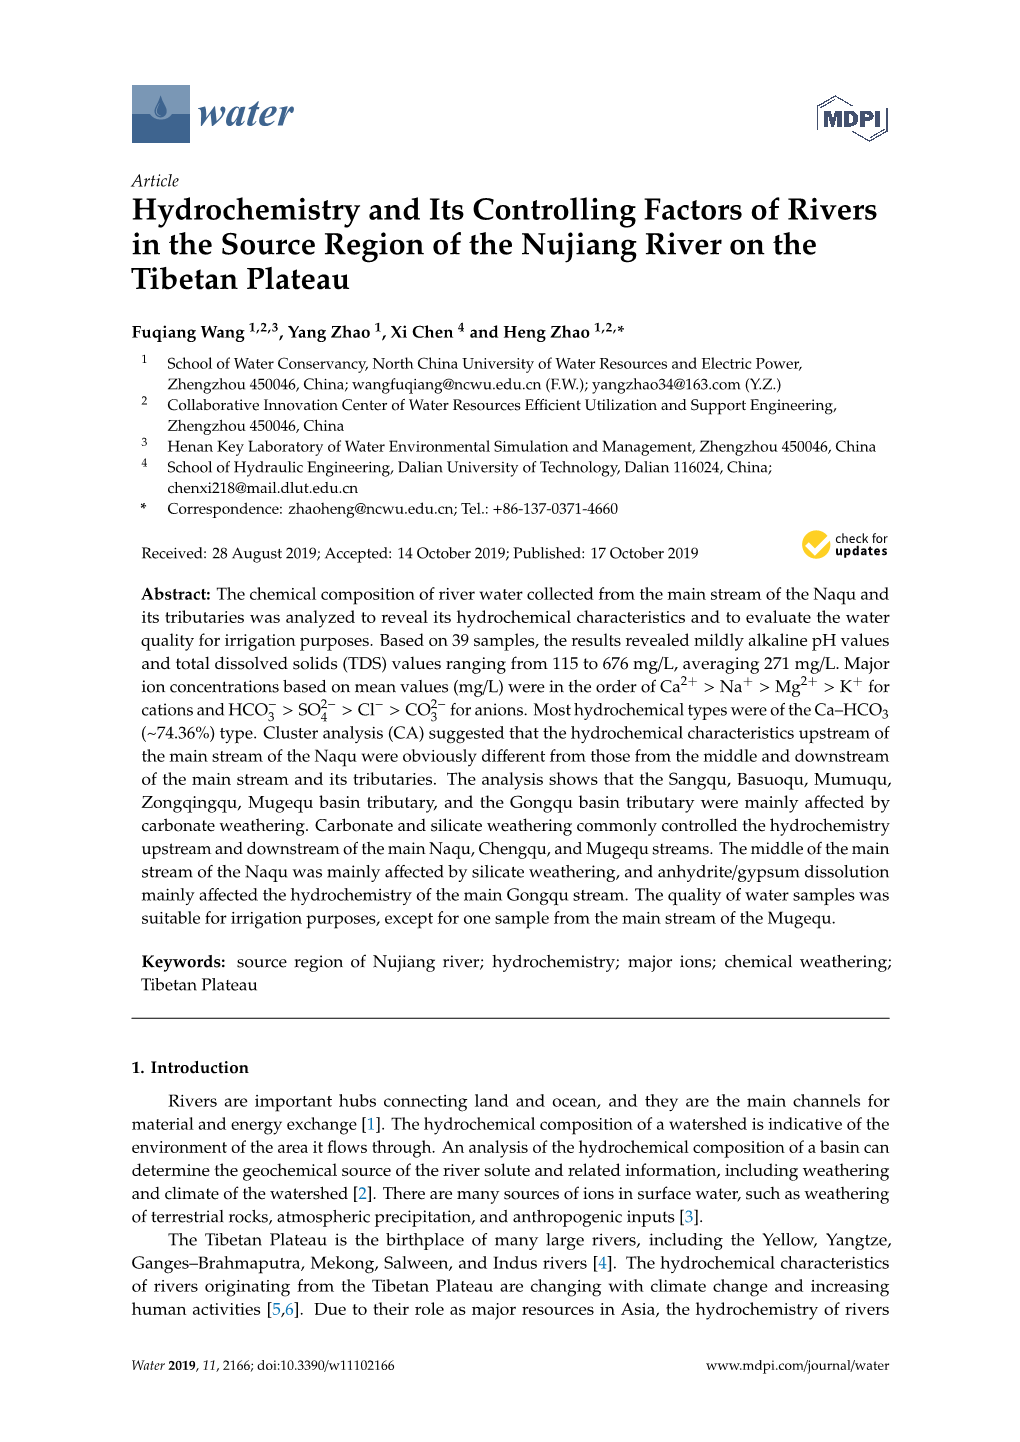 Hydrochemistry and Its Controlling Factors of Rivers in the Source Region of the Nujiang River on the Tibetan Plateau